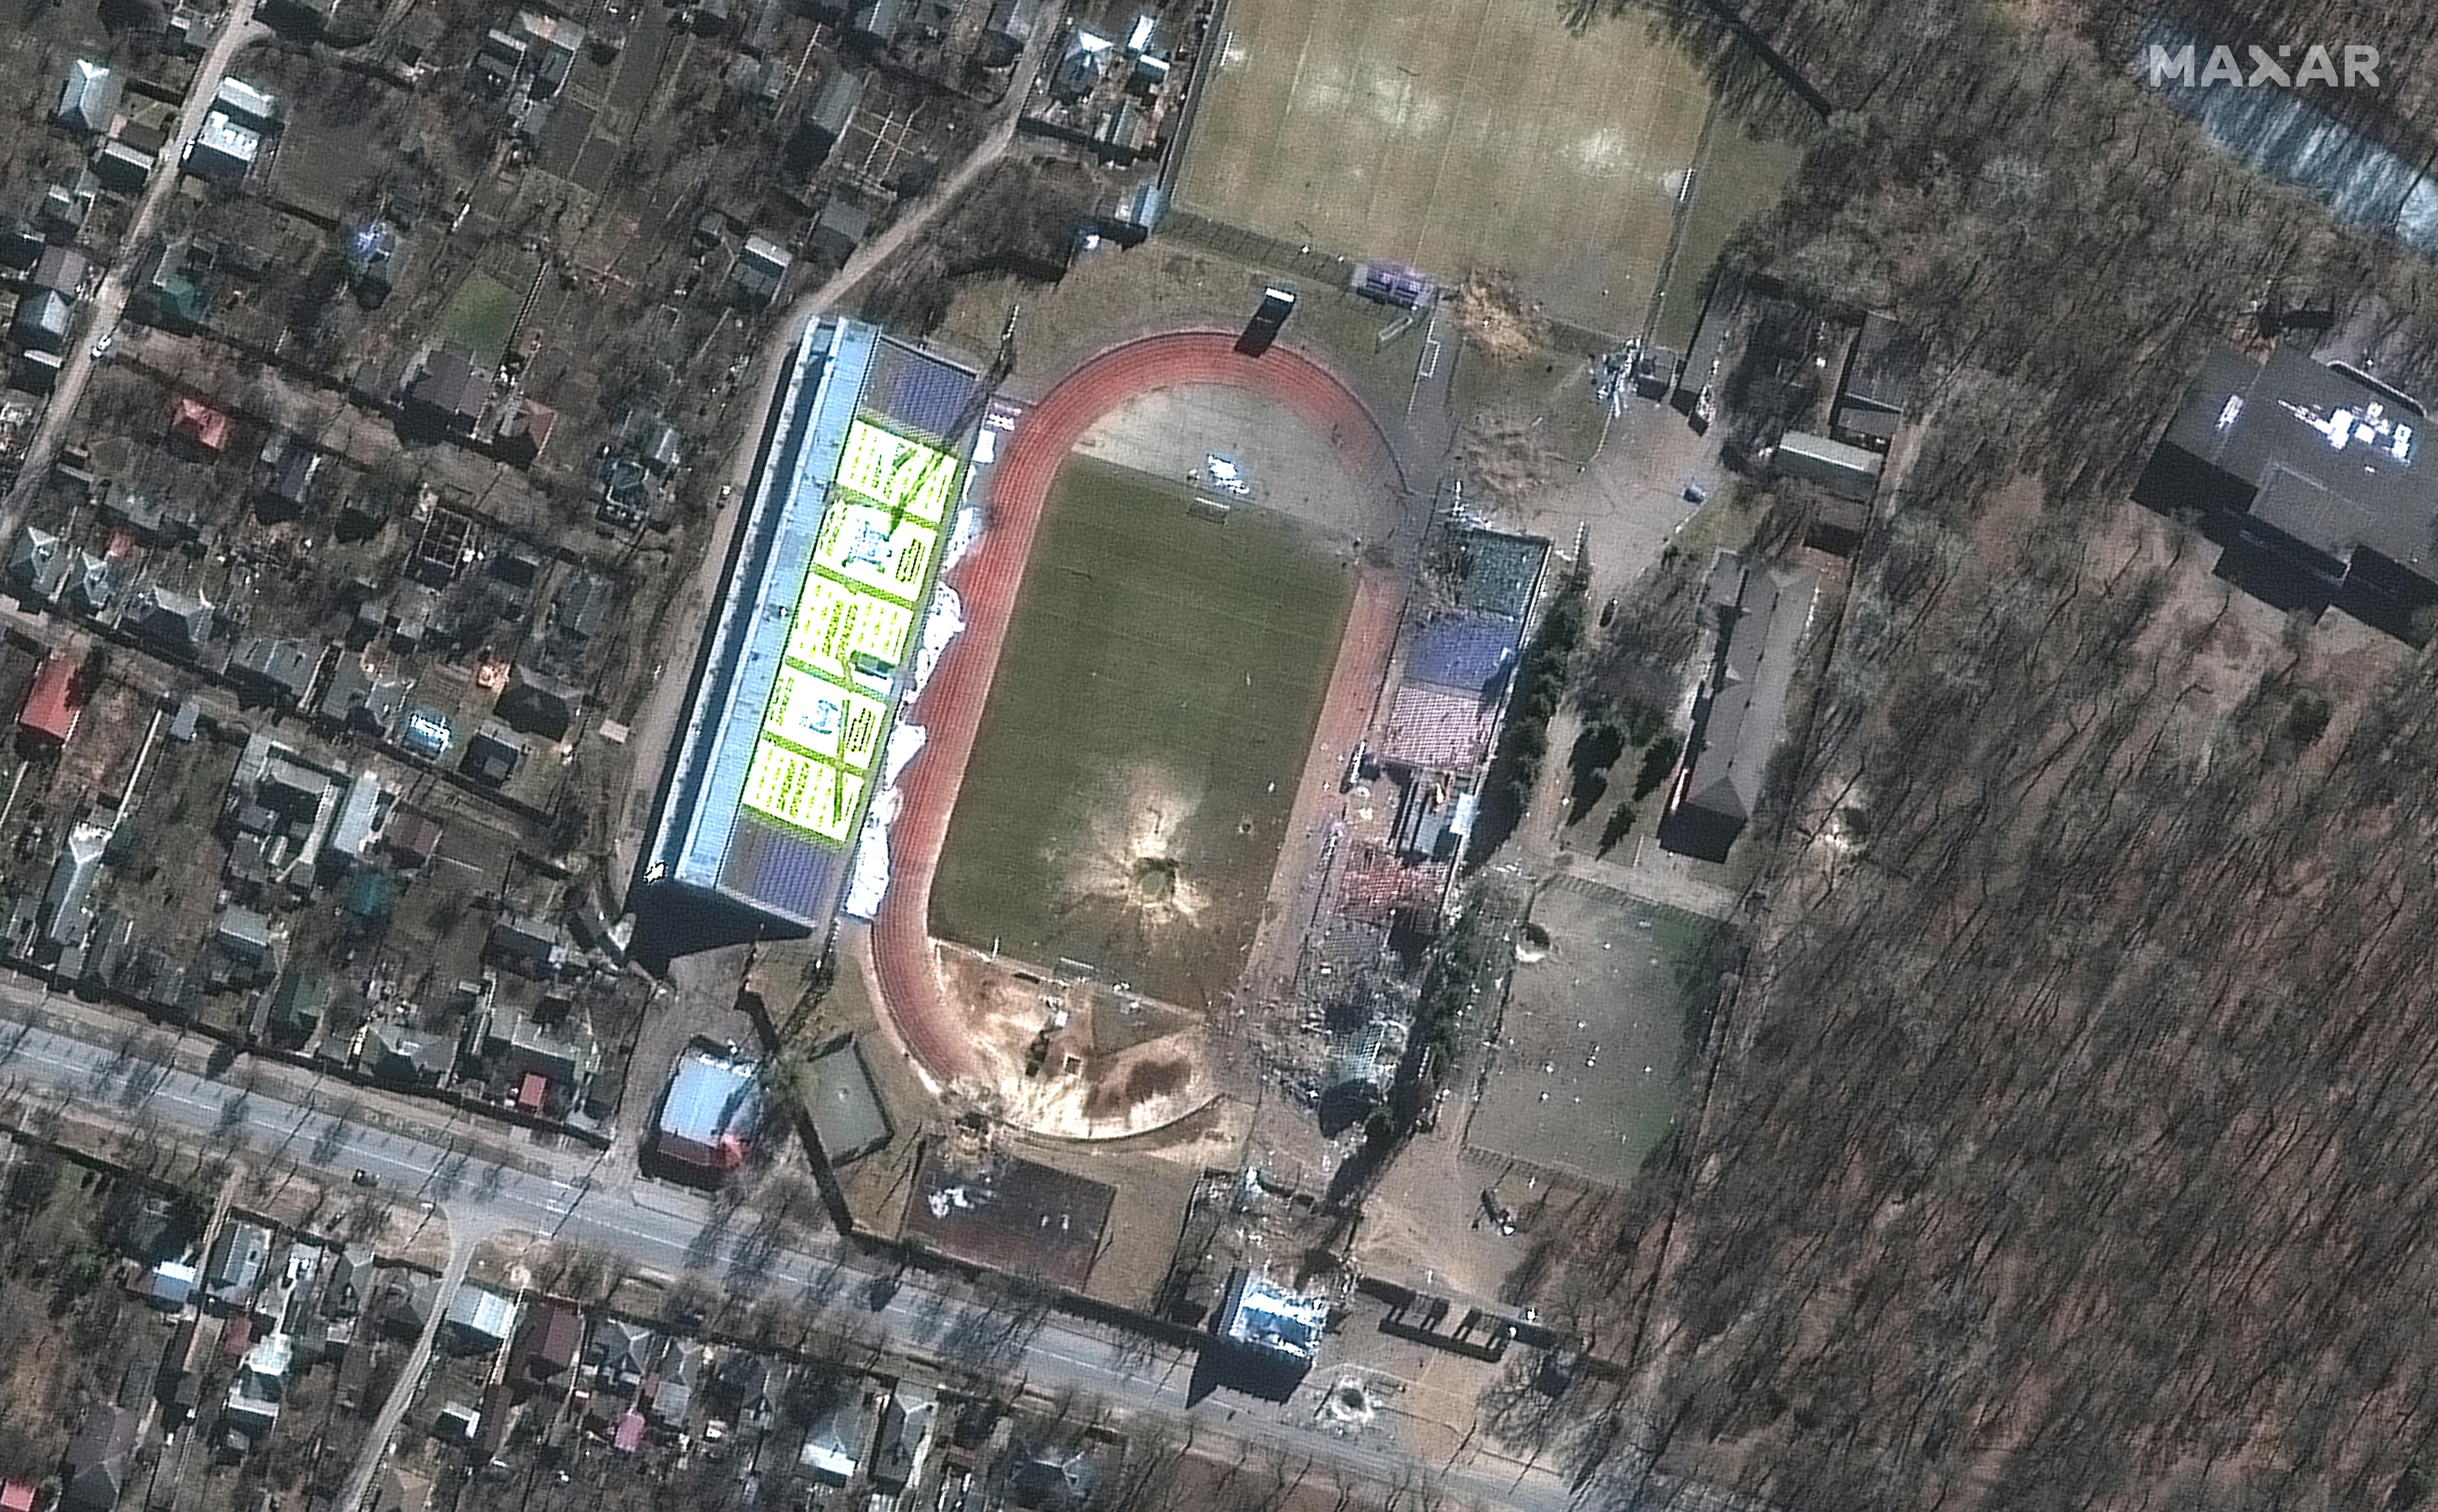 Damaged stadium photographed from the air